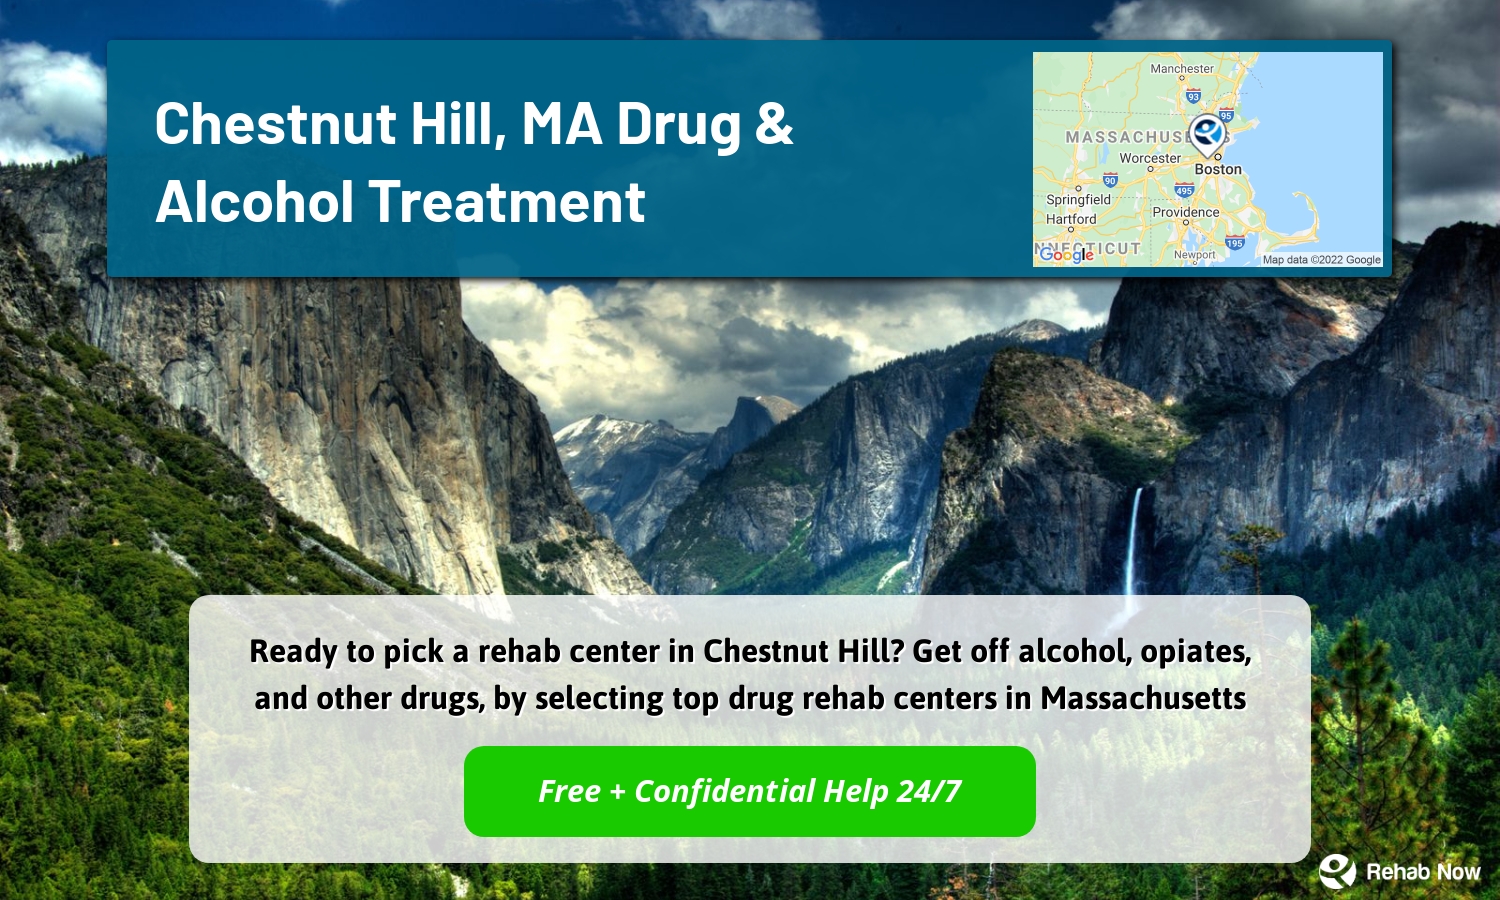 Ready to pick a rehab center in Chestnut Hill? Get off alcohol, opiates, and other drugs, by selecting top drug rehab centers in Massachusetts